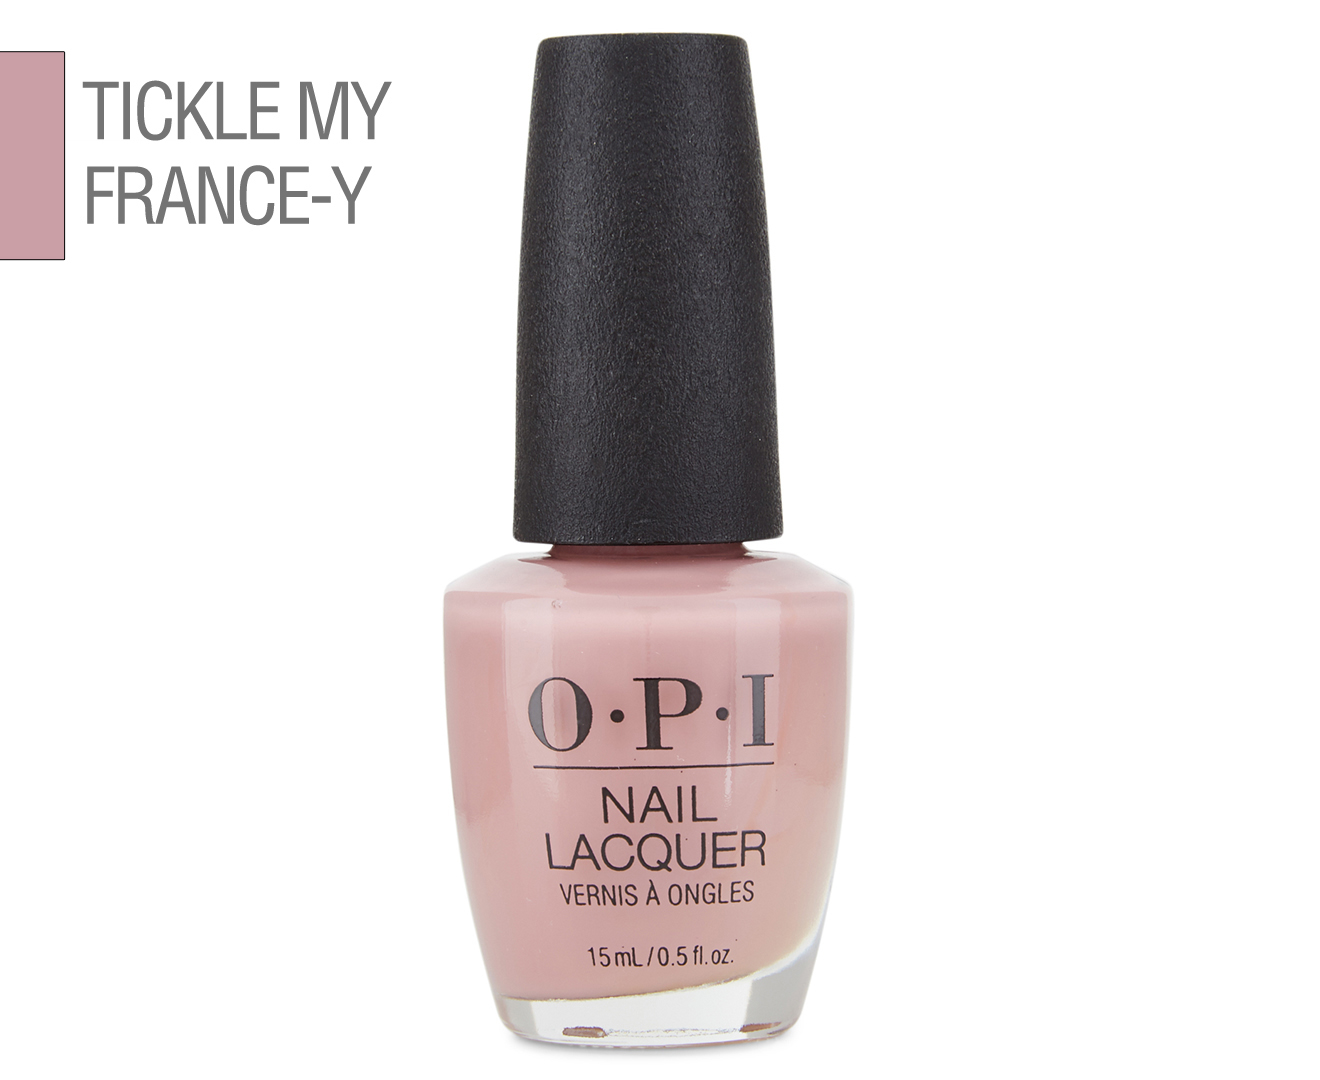 OPI Nail Lacquer, Tickle My France-y - wide 5